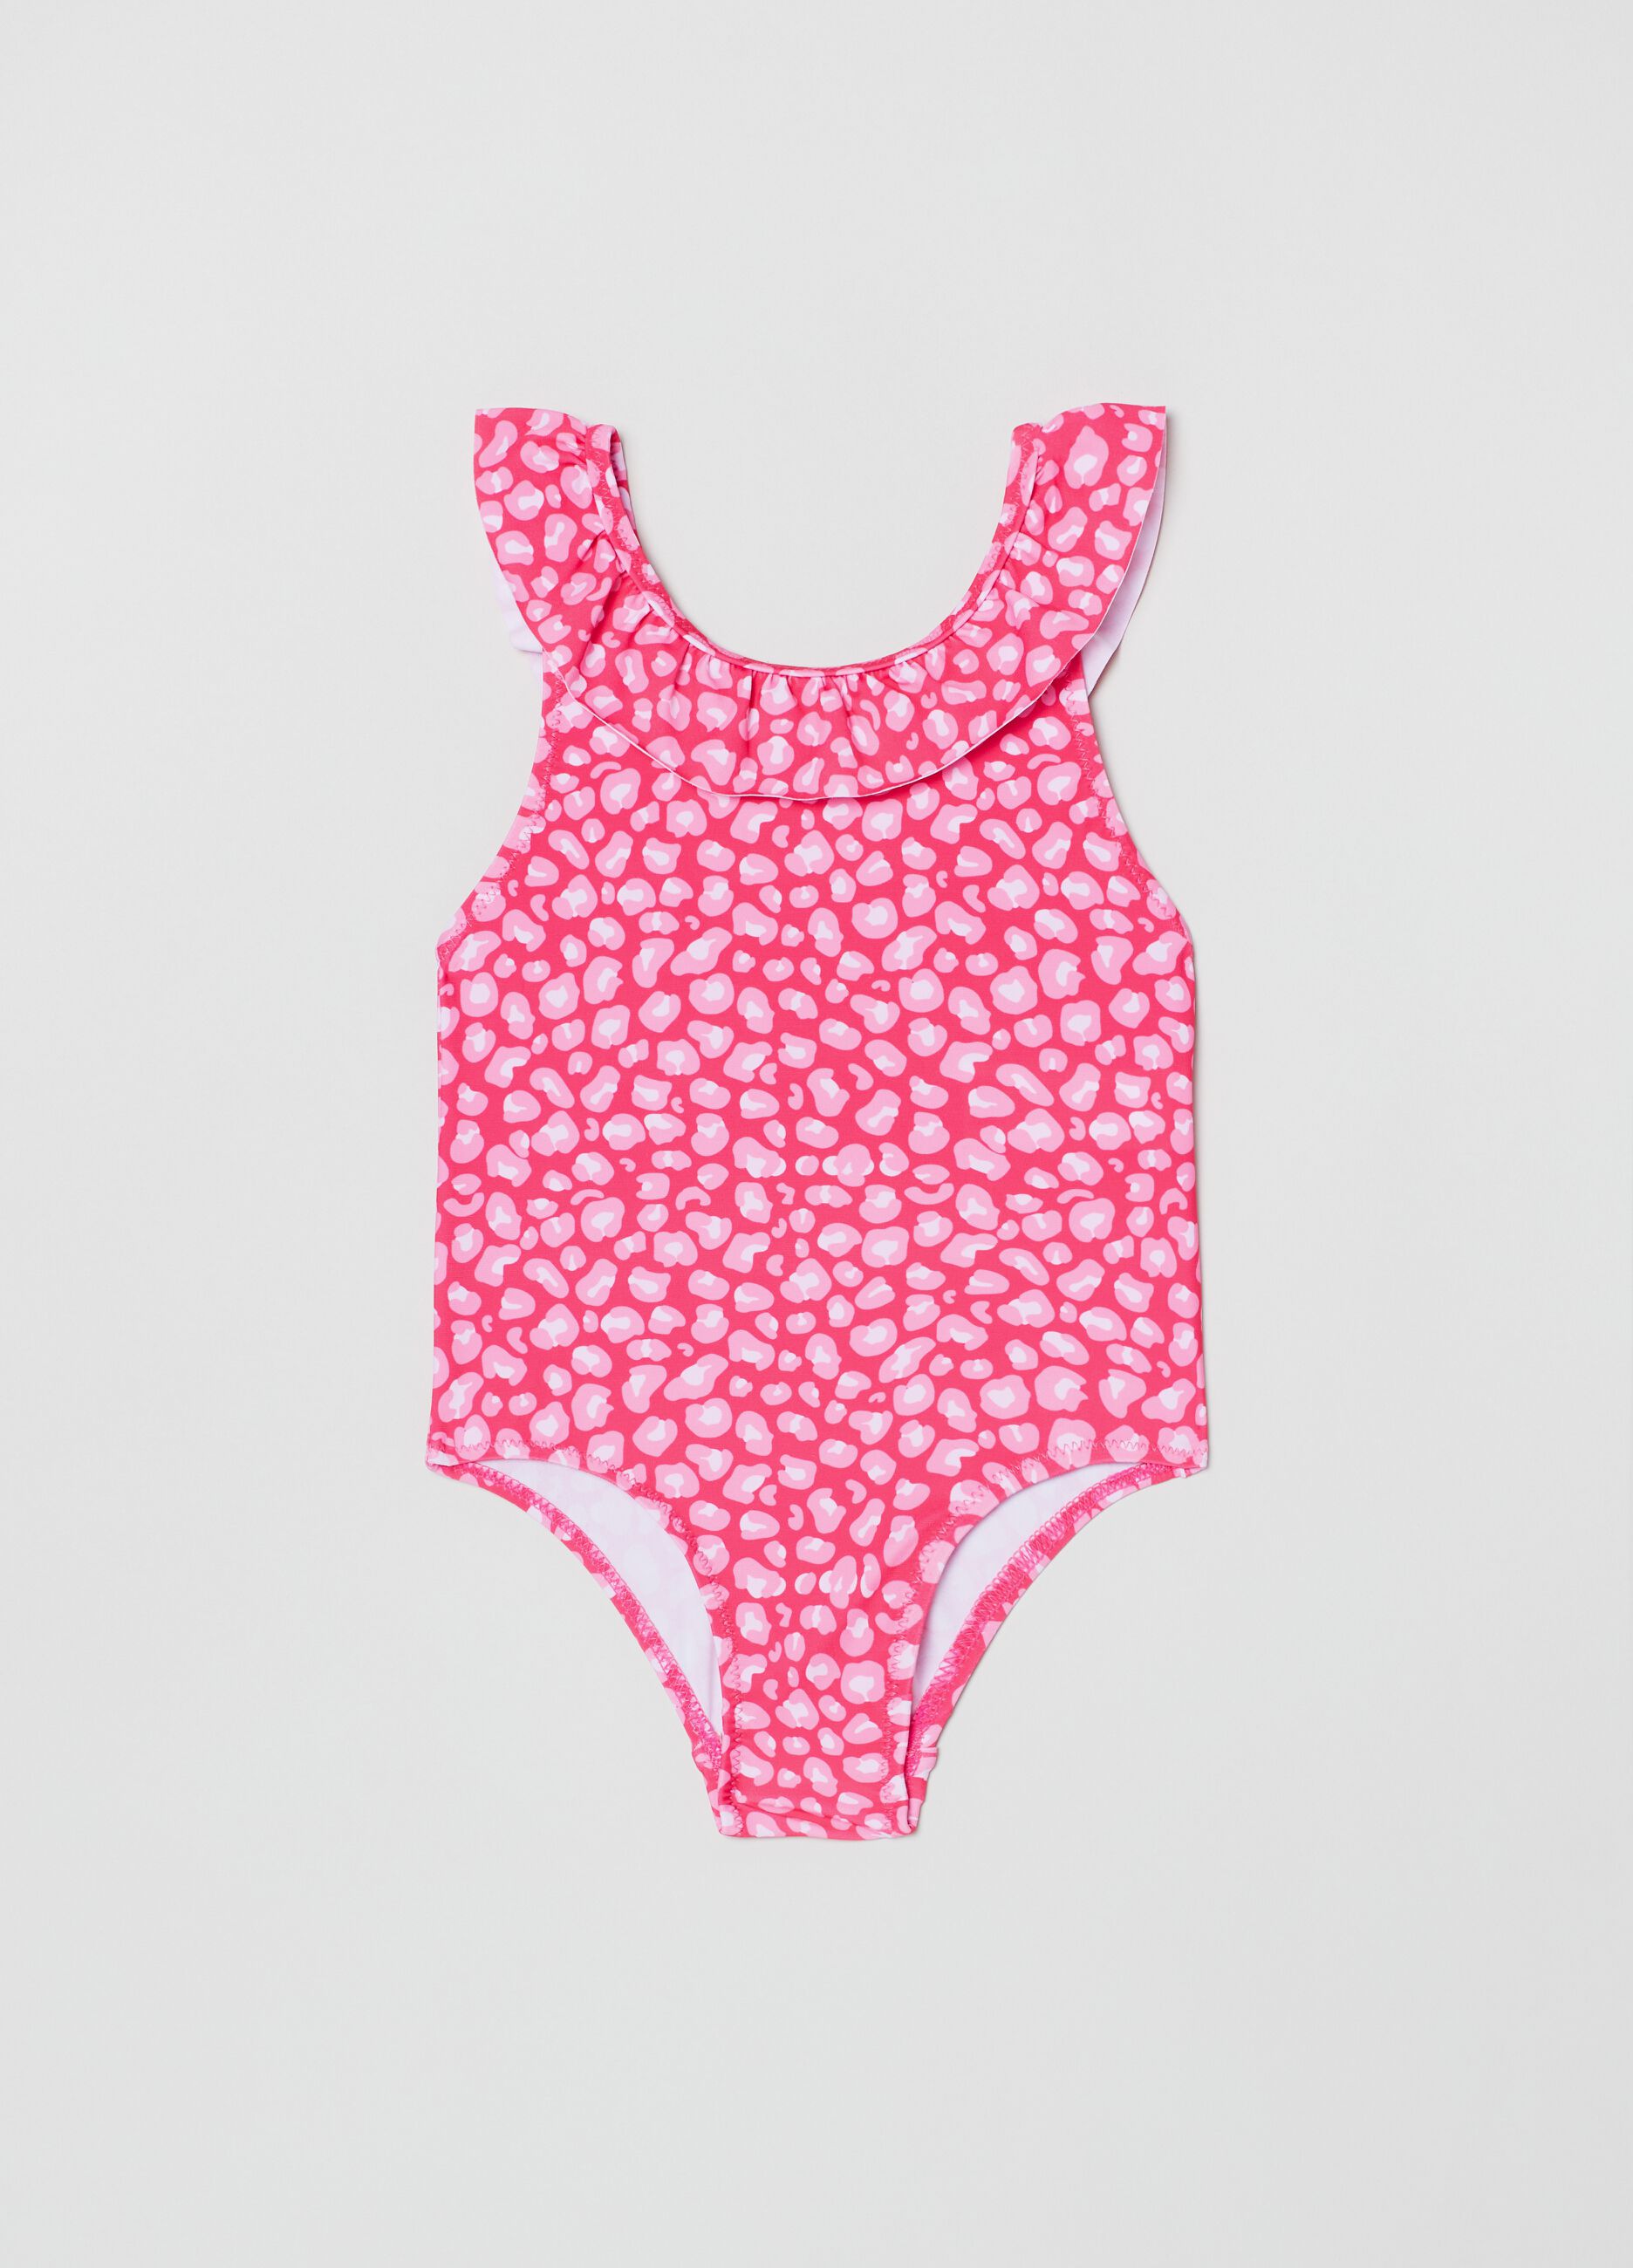 One-piece swimsuit with animal print pattern